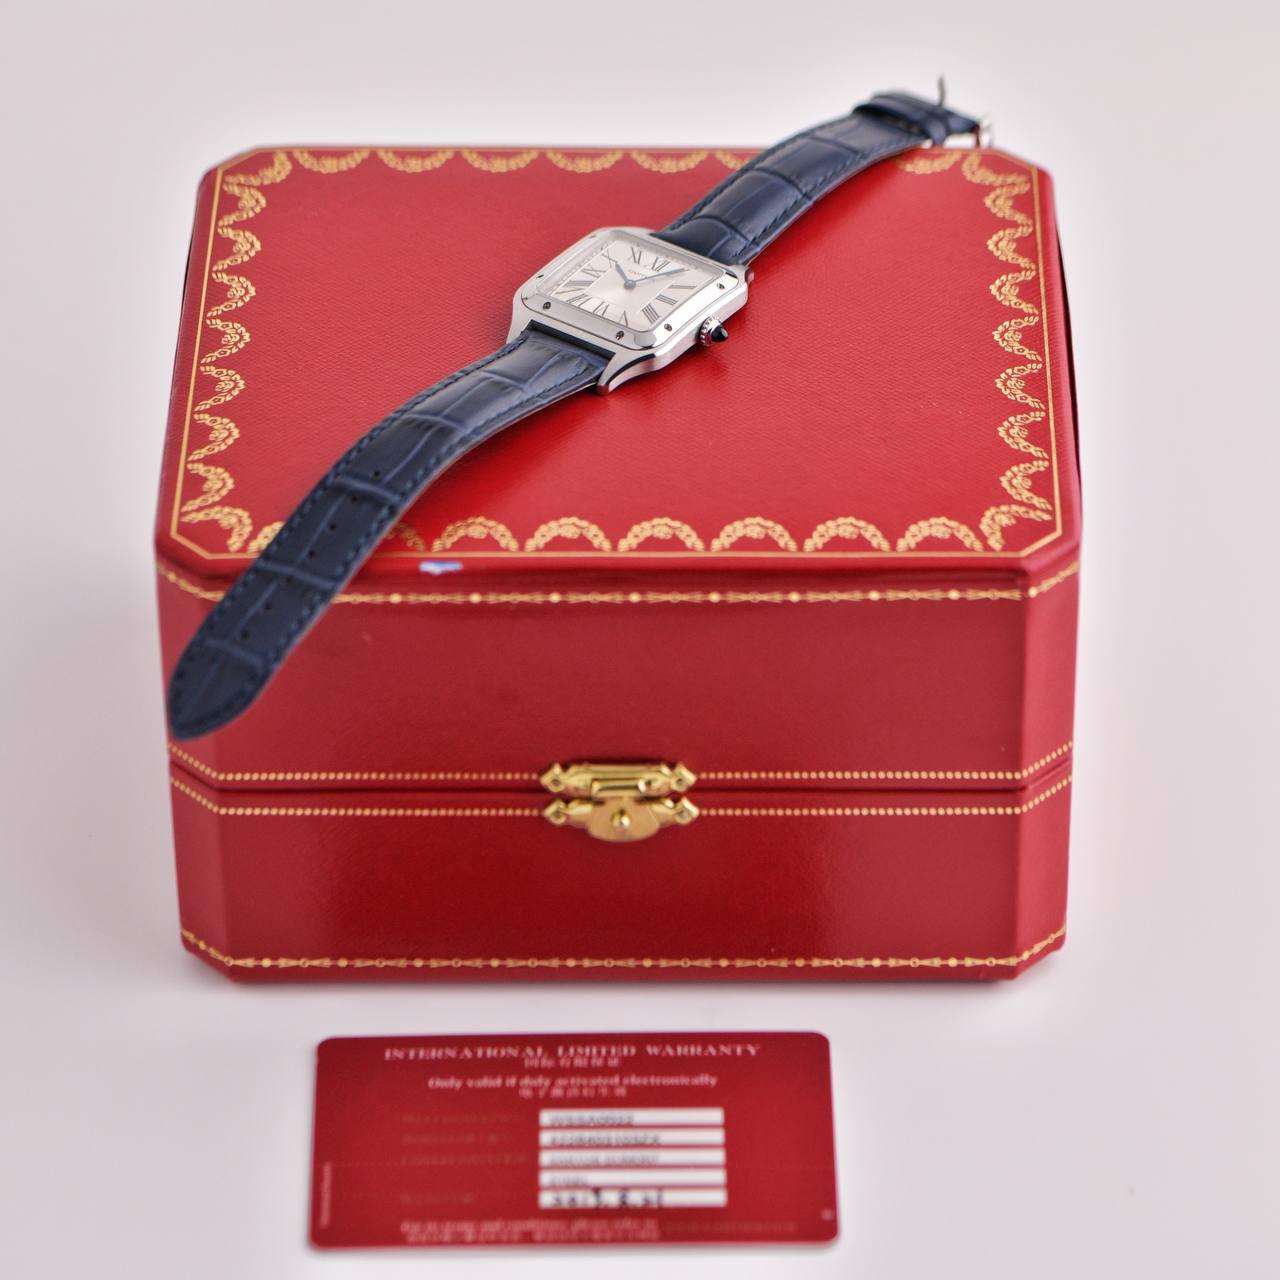 SKU AT-1817
Brand Cartier
Model No. WSSA0022
Retail Price £4,000incl. VAT / $4,200 / €4 500 incl. VAT
____________________________________
Date Circa 2019
Gender Unisex / Women
Box/Papers Yes/ Yes
____________________________________
Condition 
Case